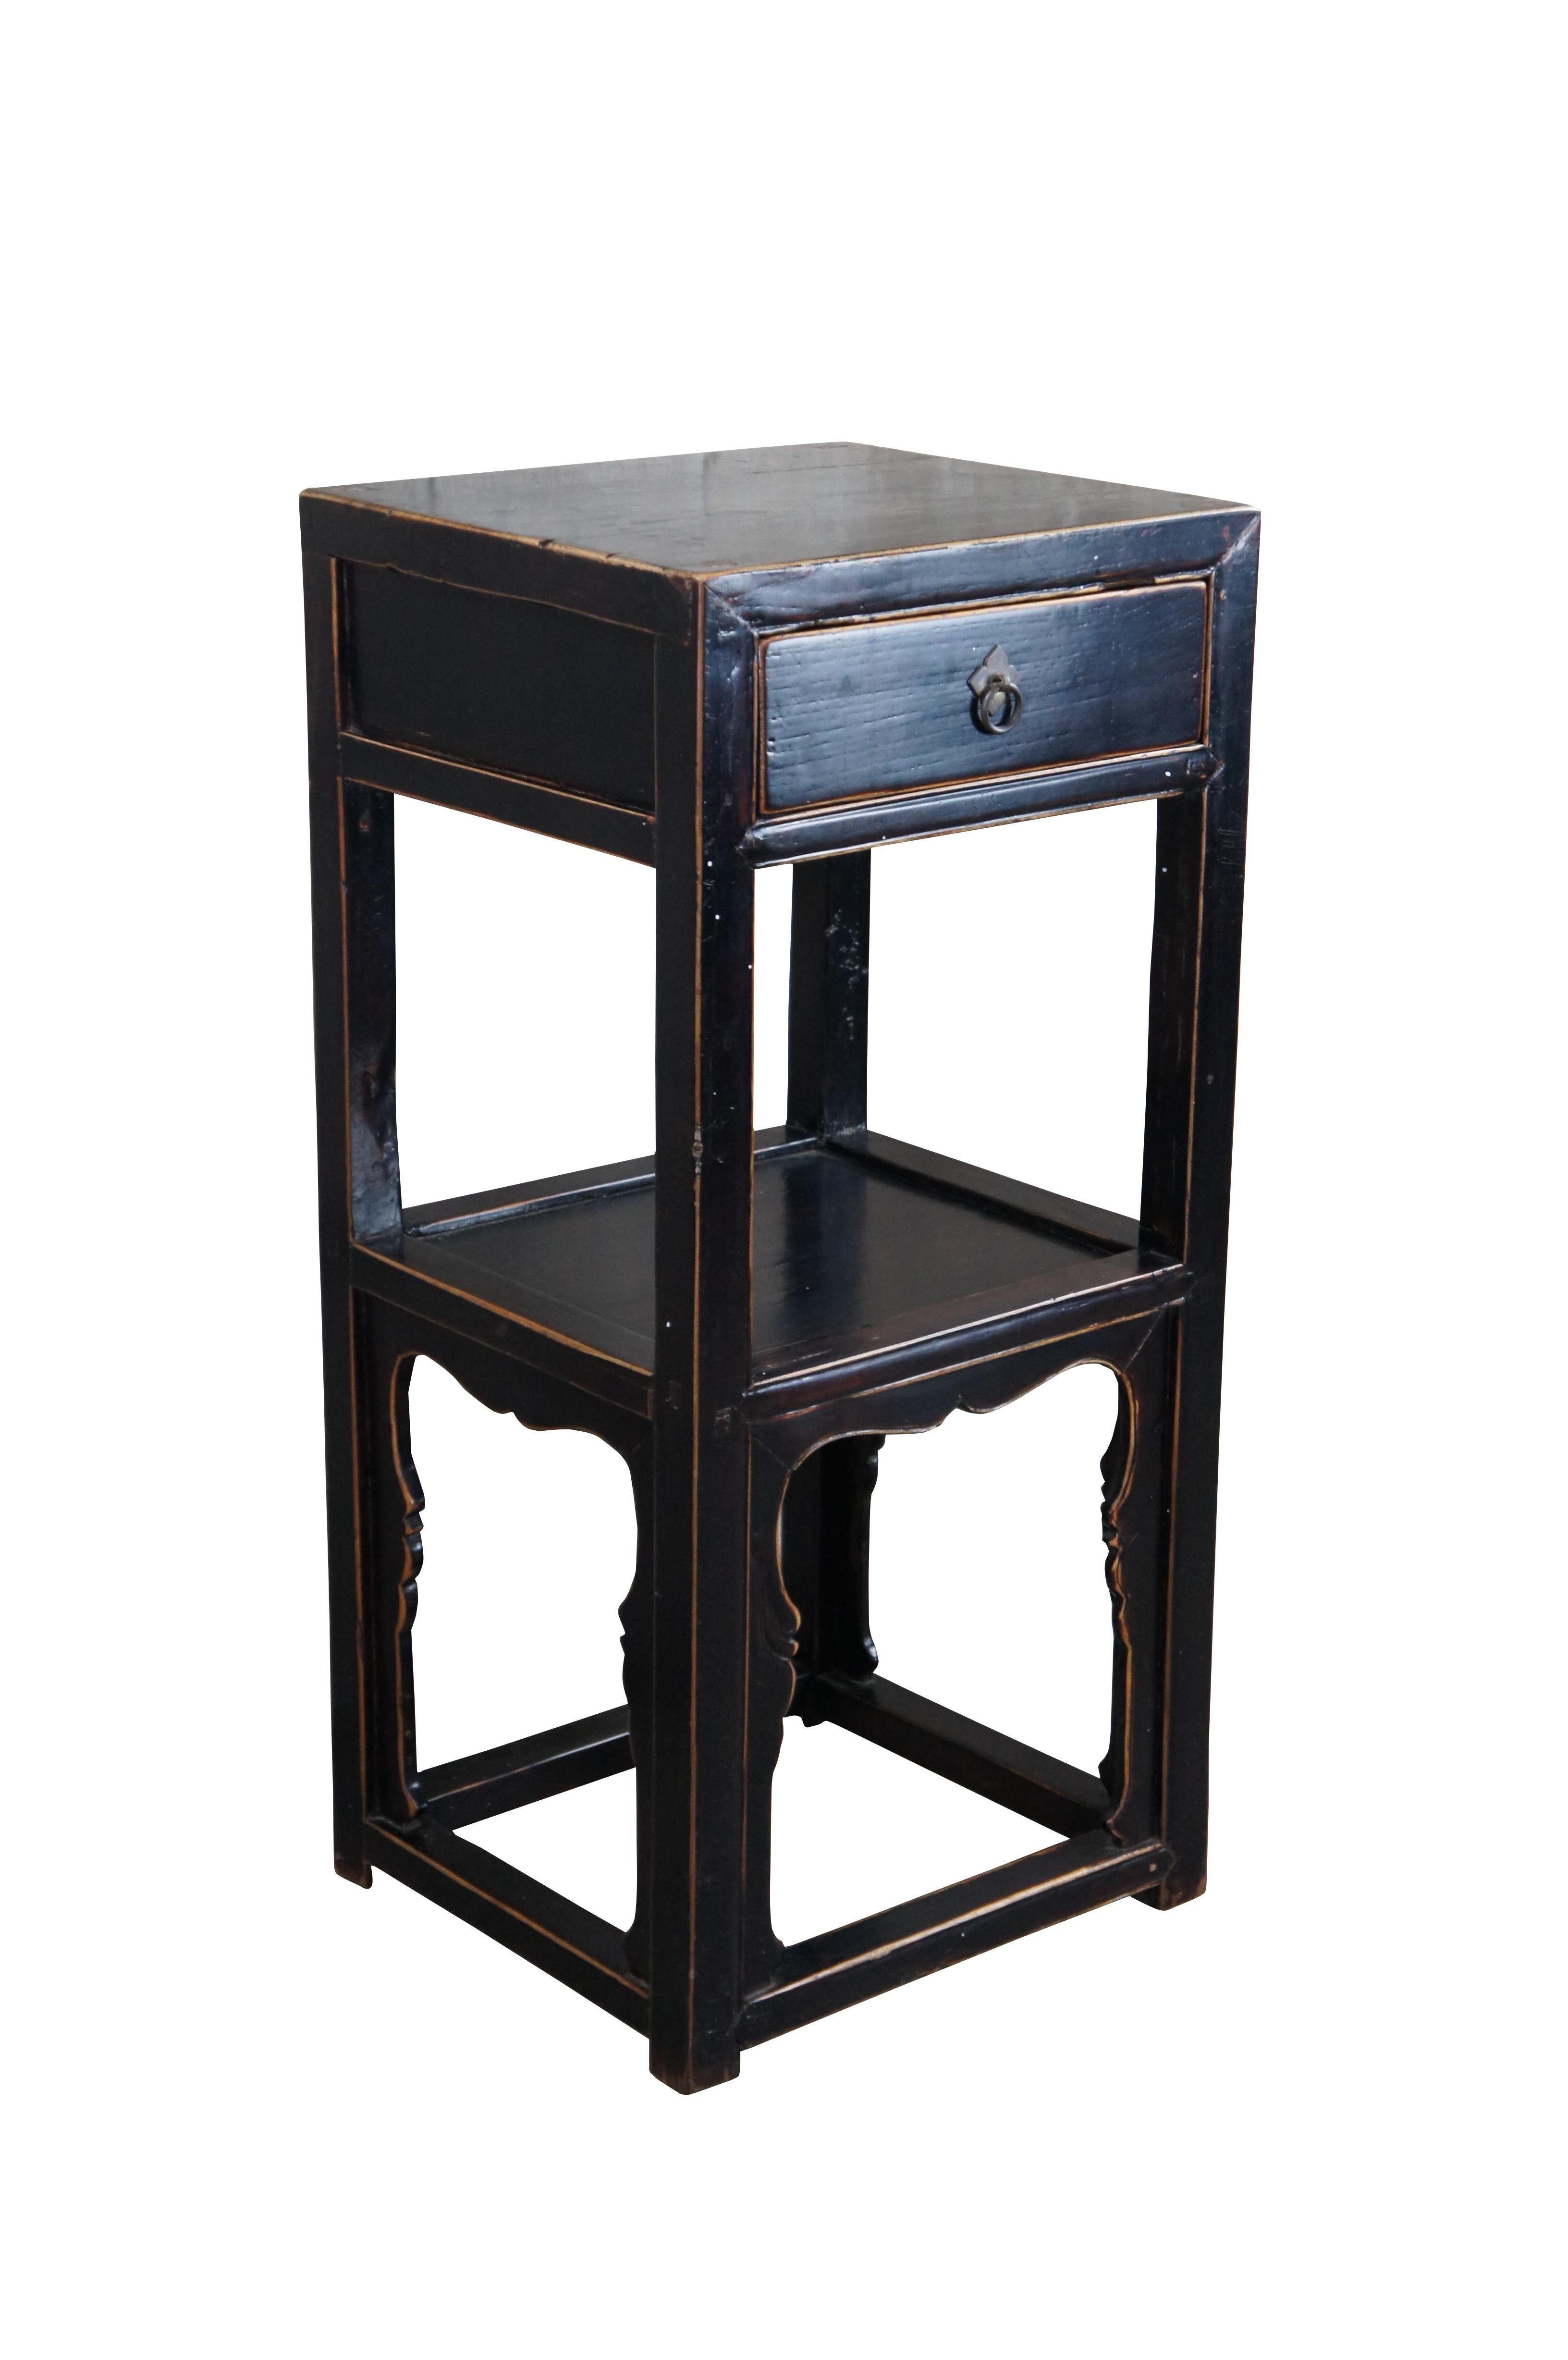 Late 19th Century Chinese Qing Dynasty Tiered Side Table or Sculpture Pedestal / Plant Stand. Made from elm with a black lacquer finish. Features a dovetailed drawer, lower shelf and serpentine carved spandrels. Drawer has a brass pull with ring and